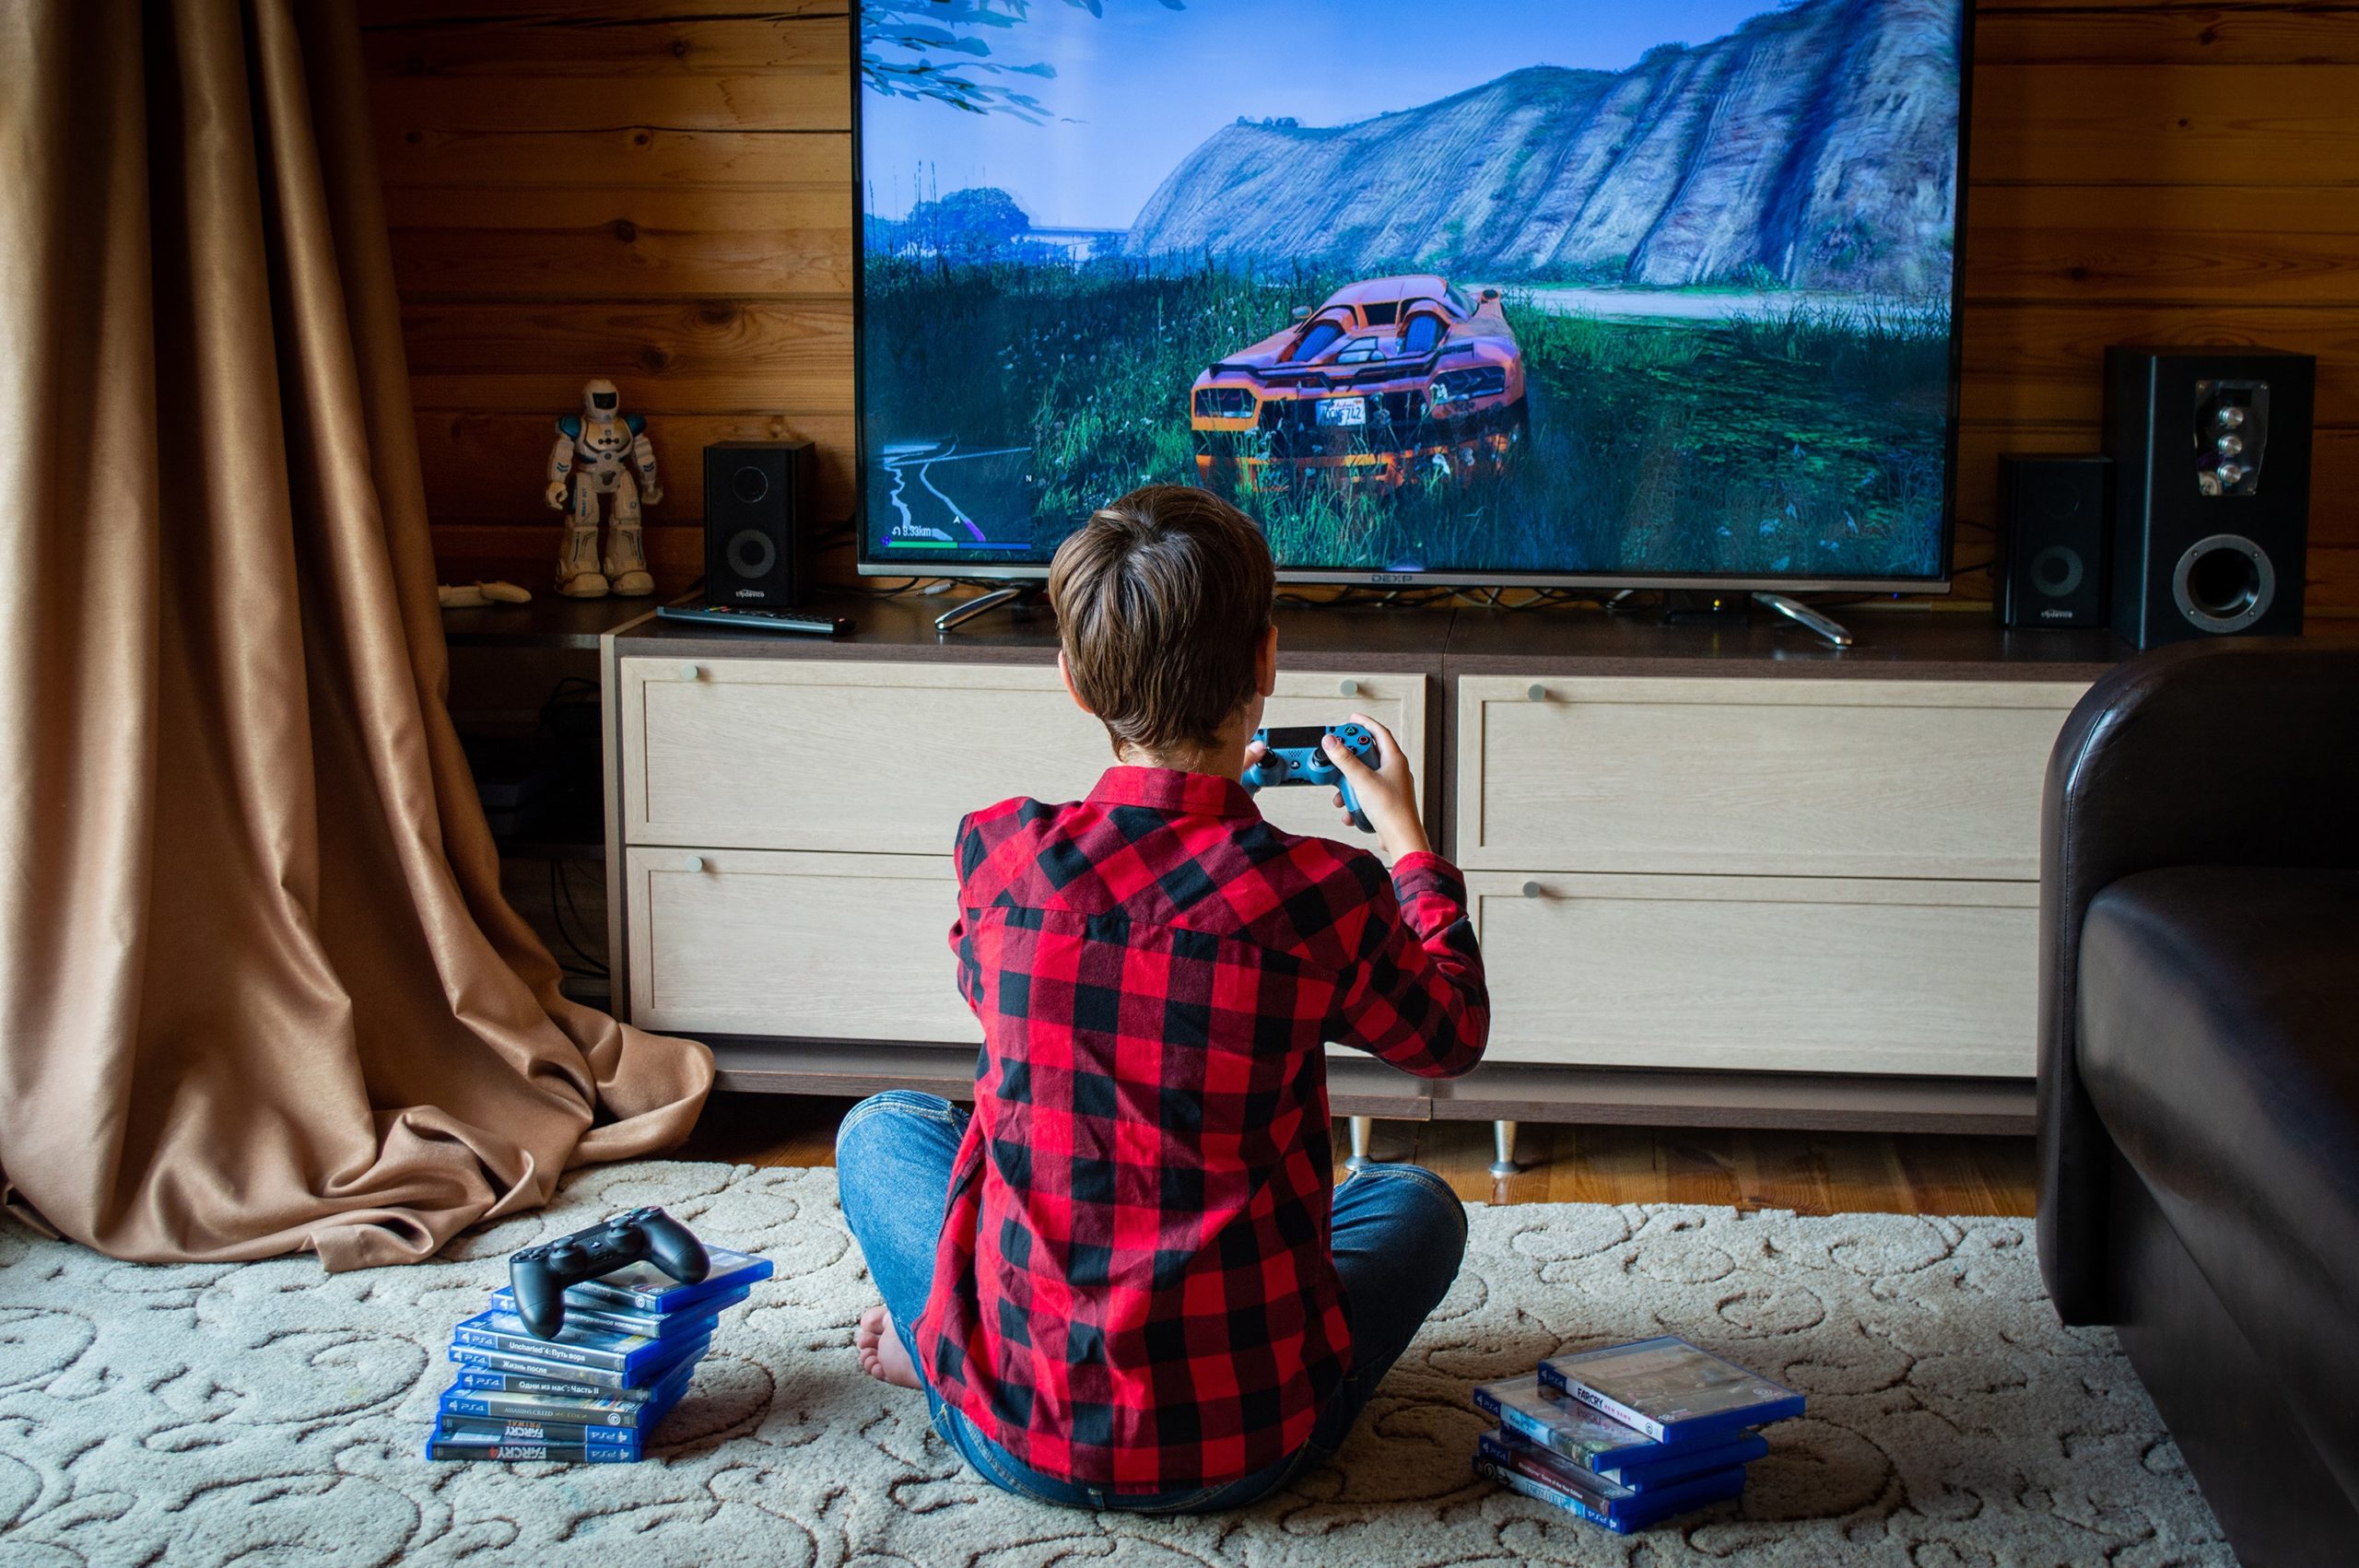 back view of a boy in a red plaid shirt playing a video game